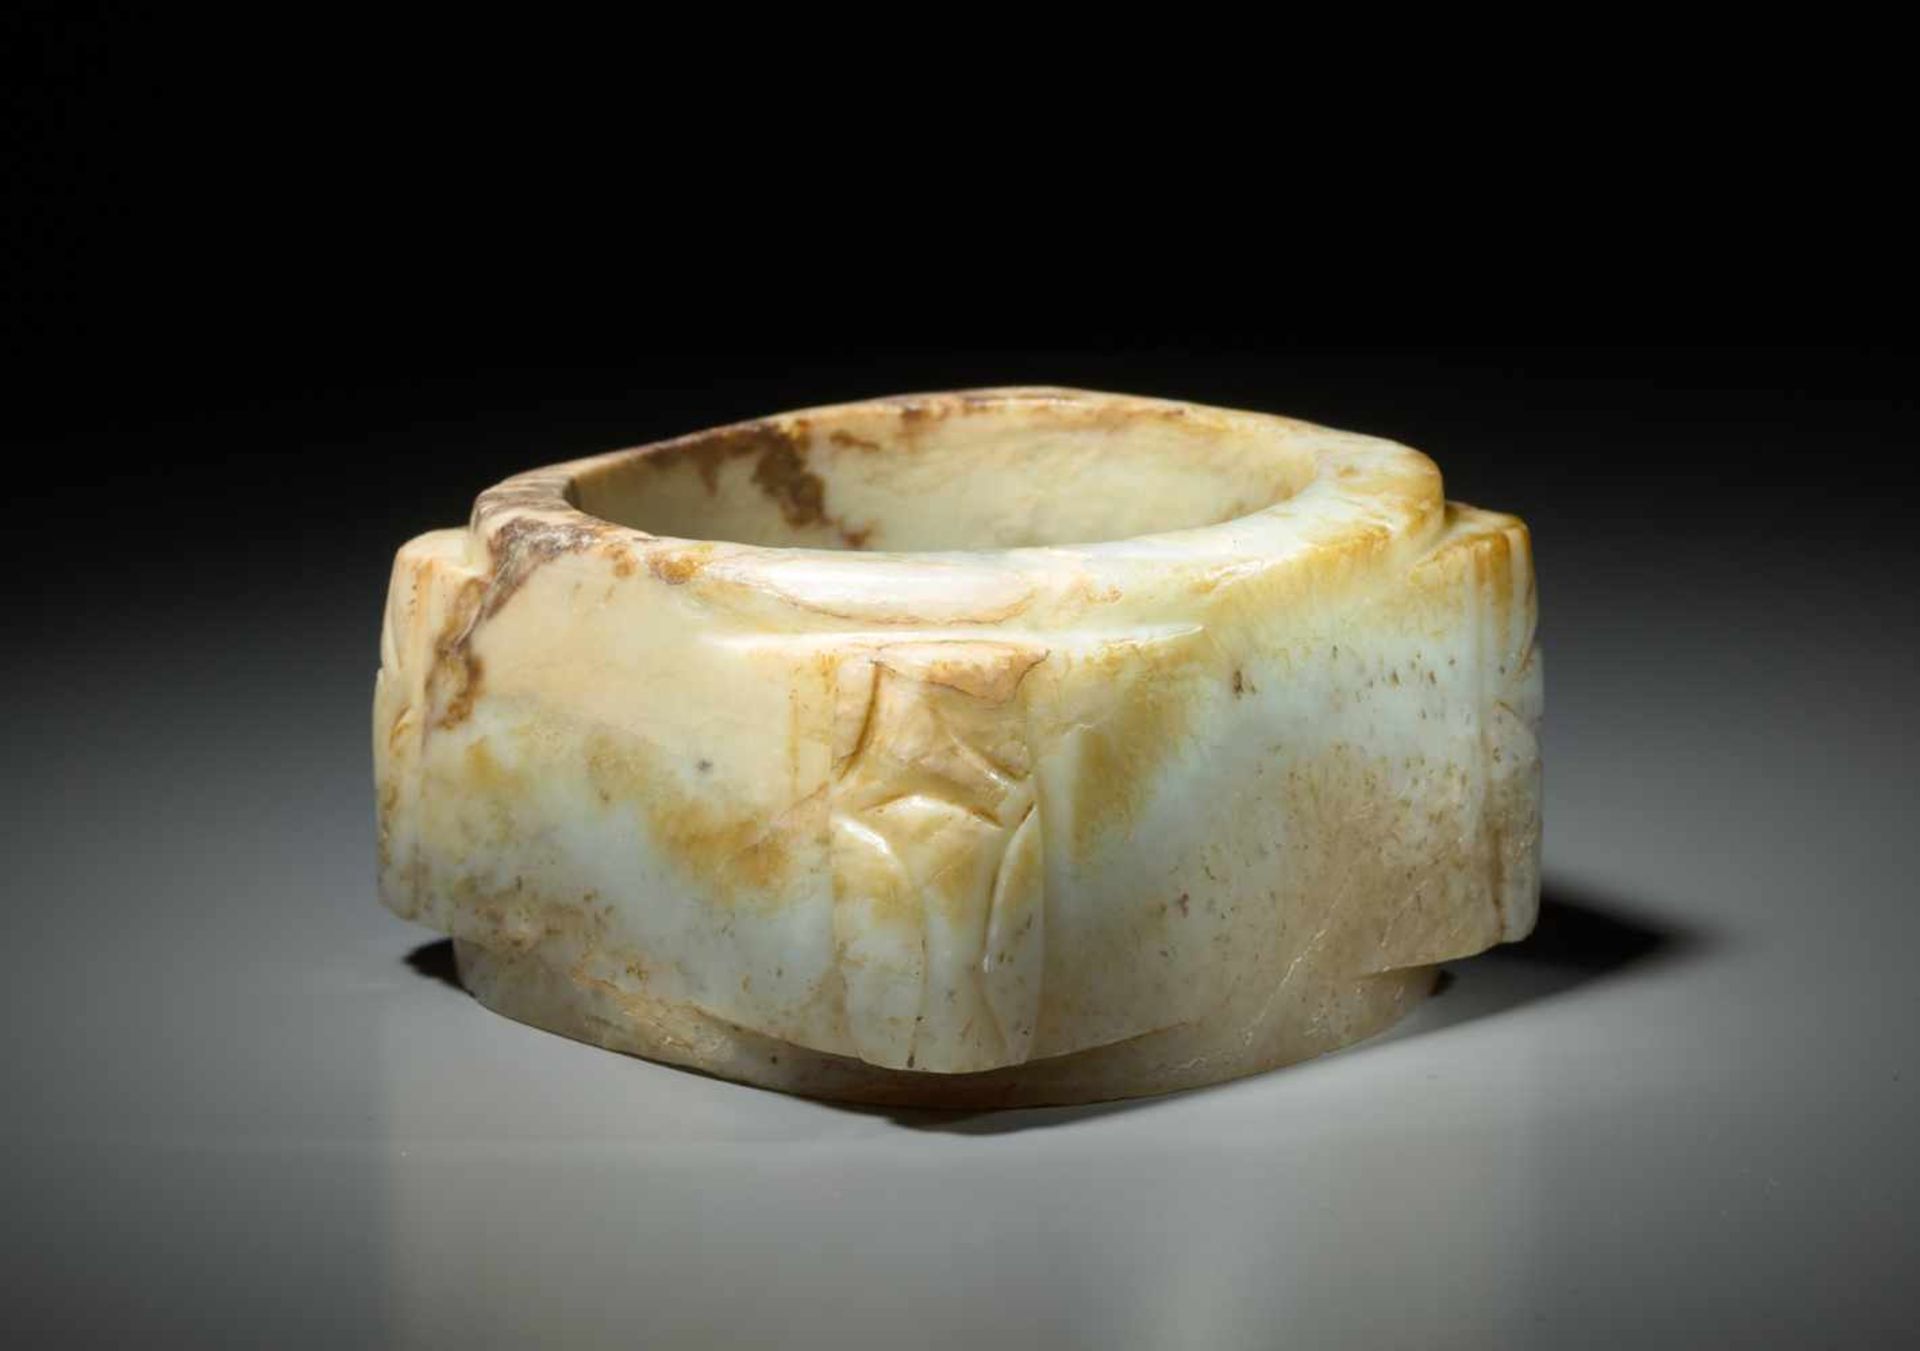 AN INTERESTING CONG IN WHITISH JADE WITH CARVED STYLIZED CICADAS ON THE CORNERS Jade. China, Late